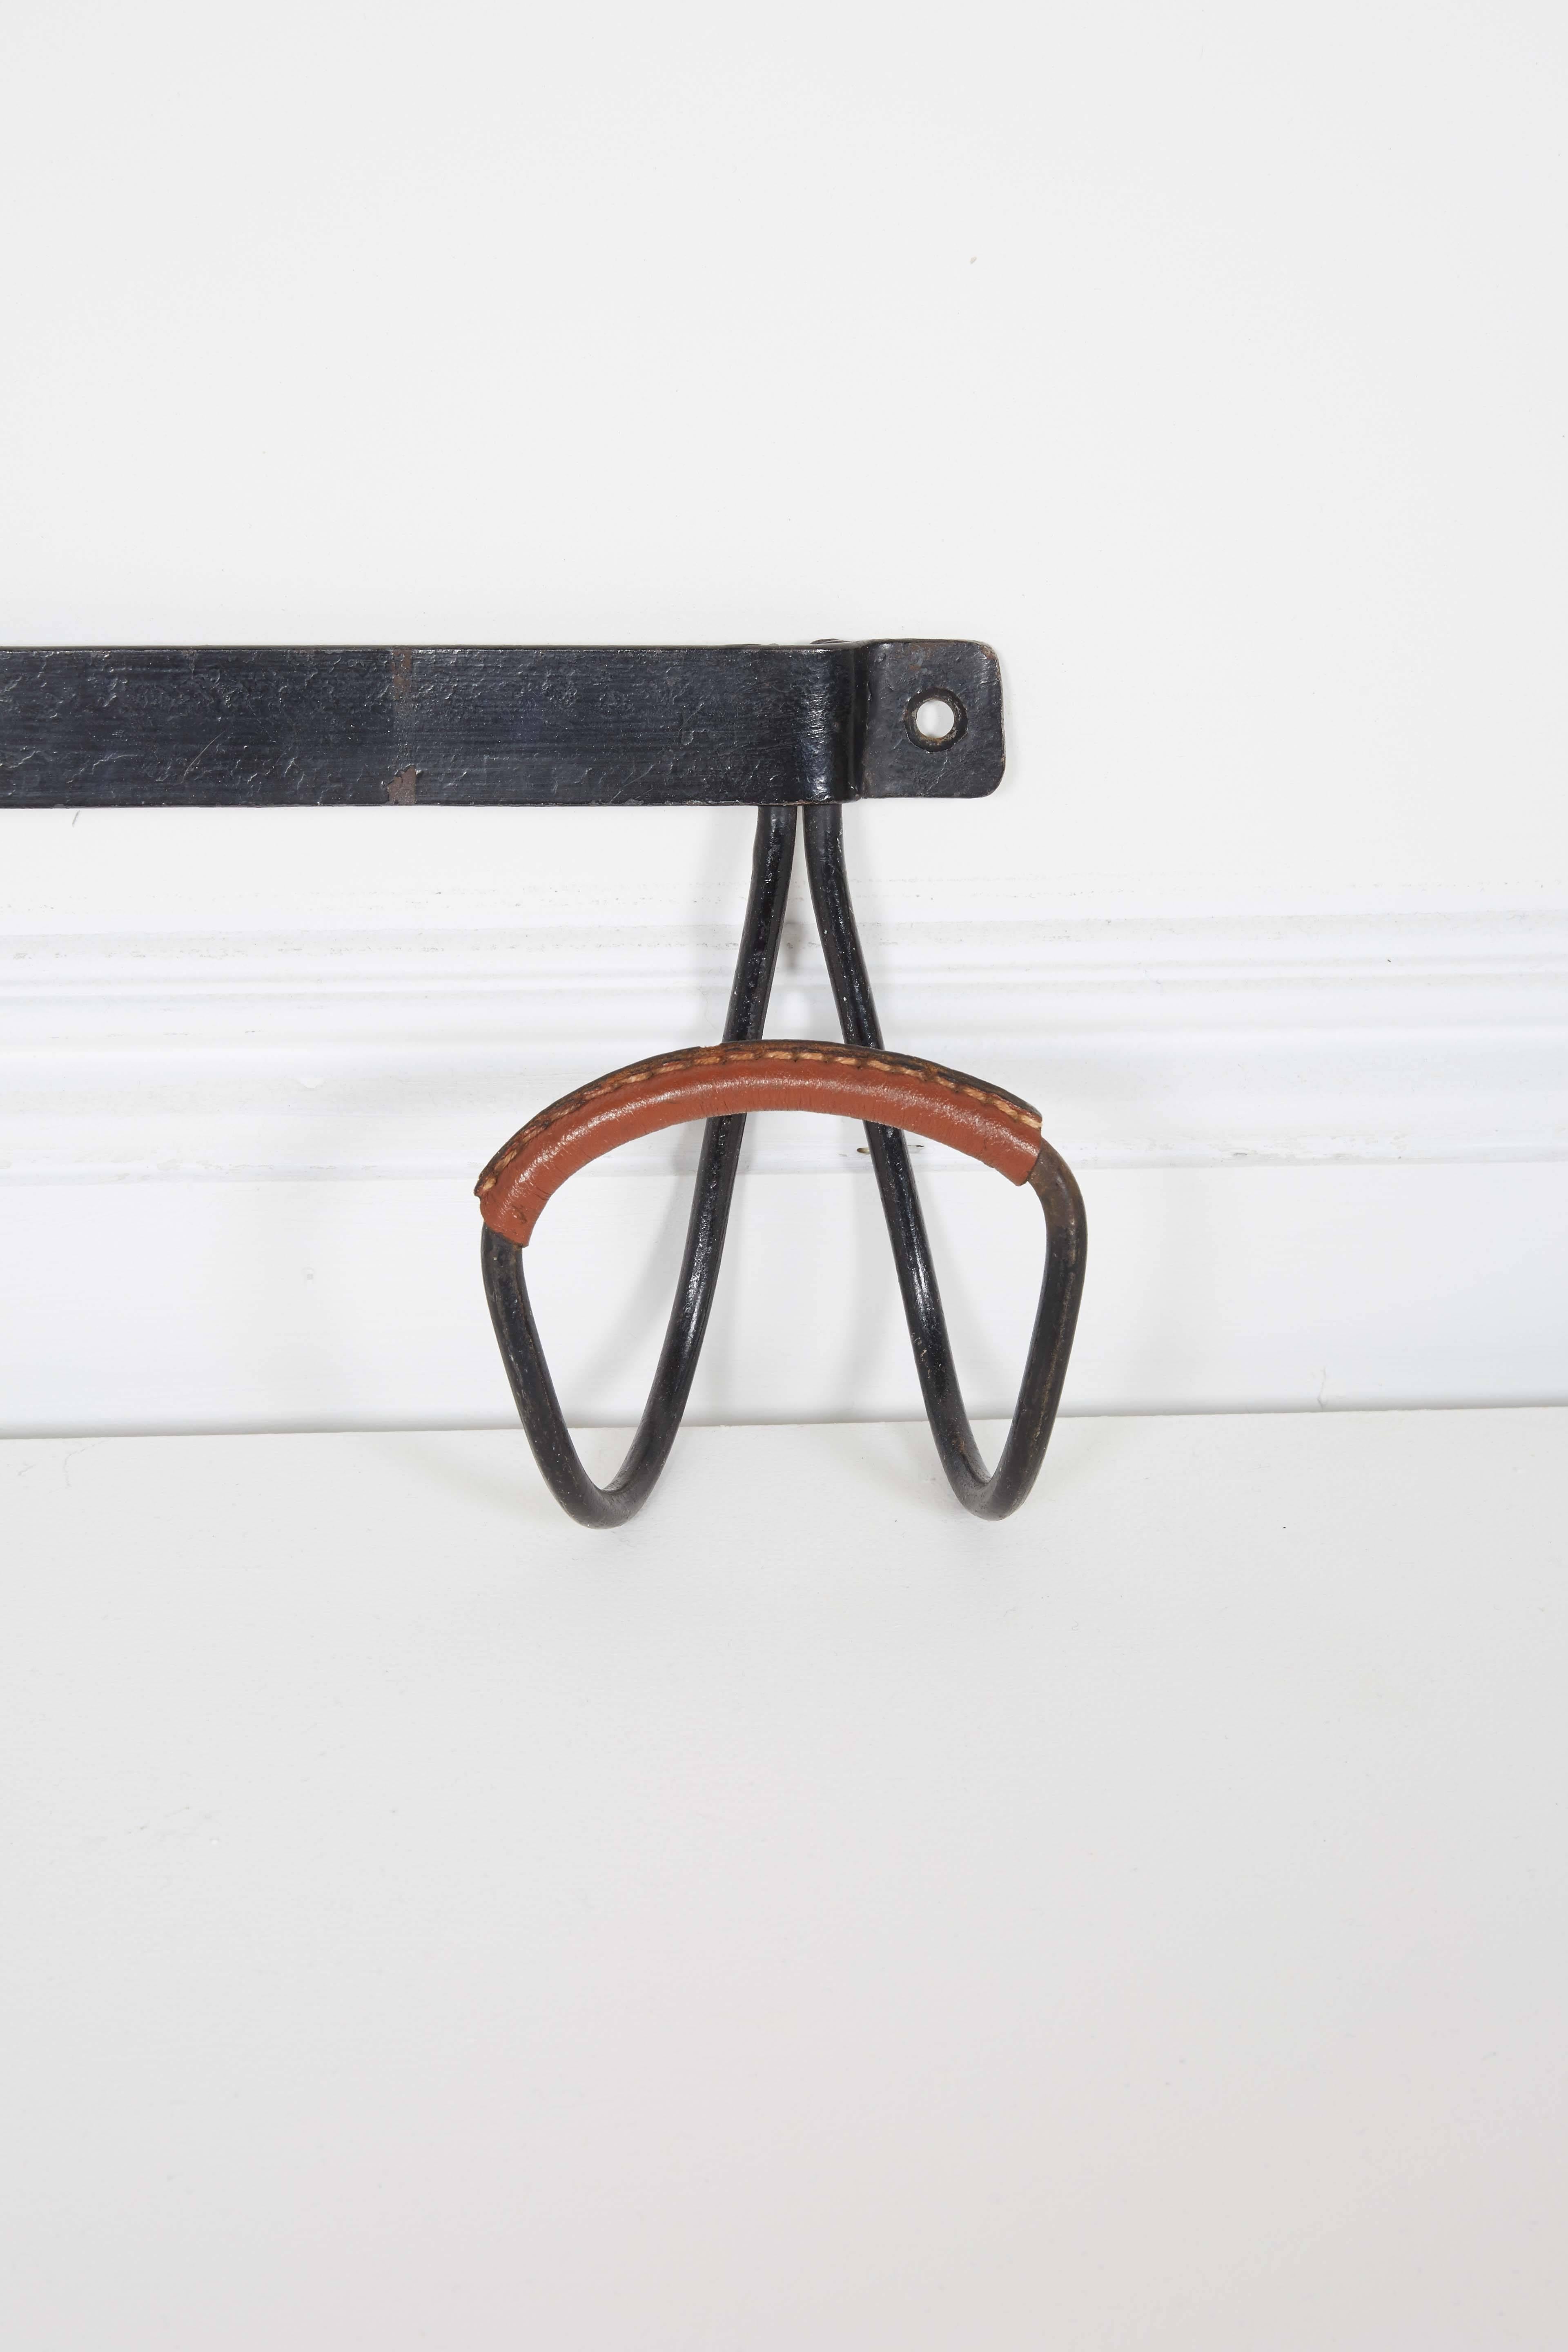 French Jacques Adnet Wall-Mounted Coat Hanger